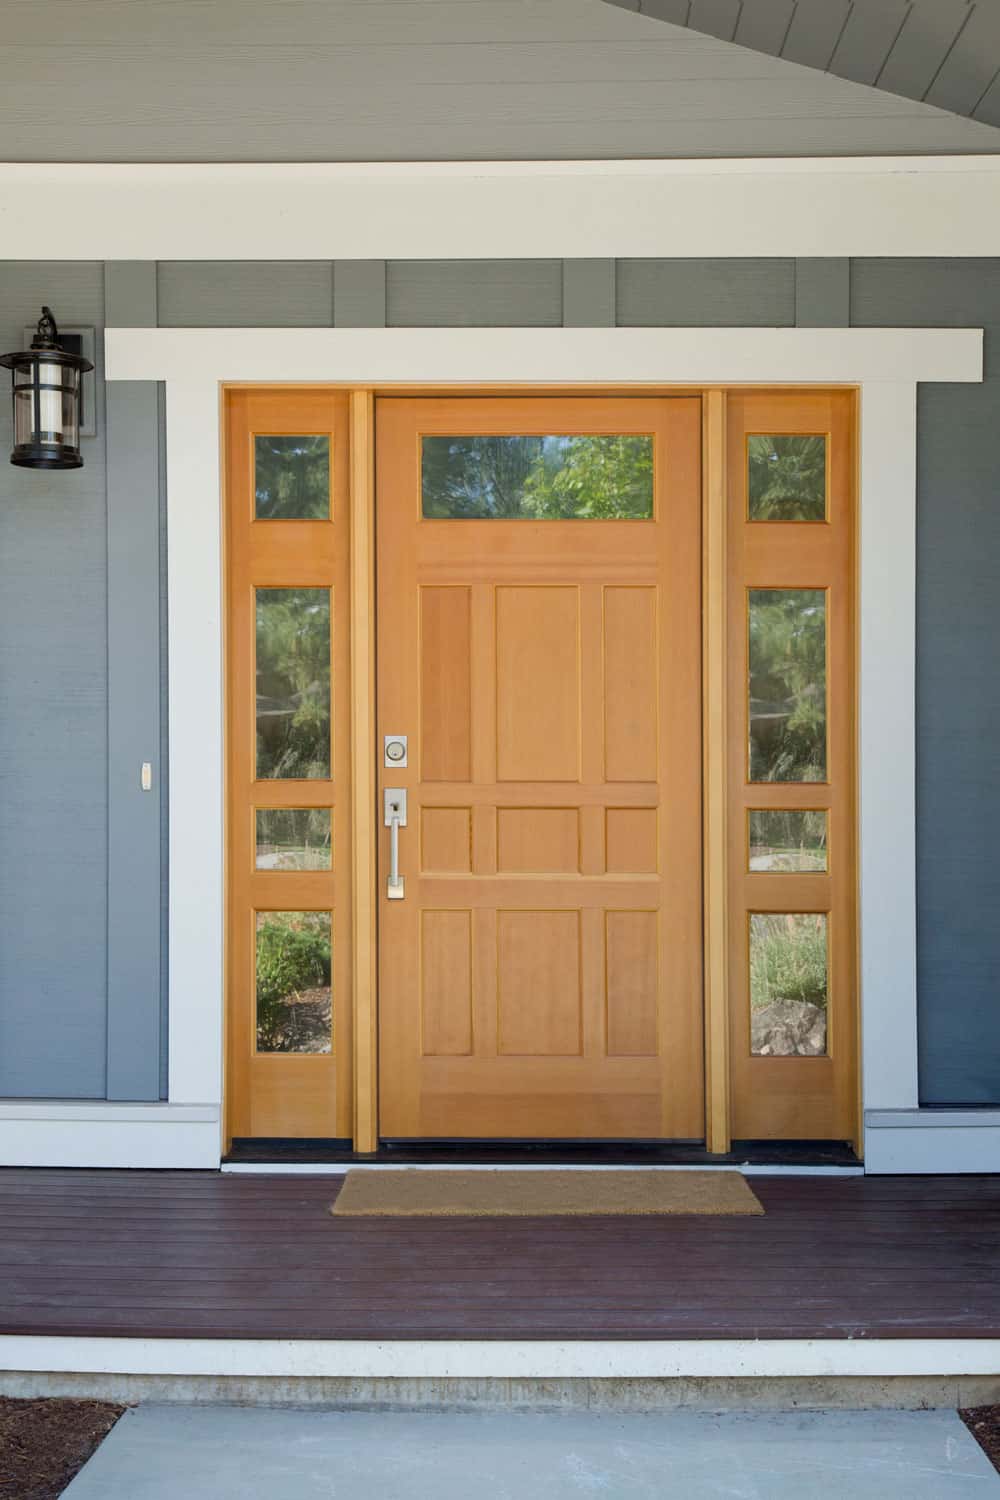 A wooden storm door with glass panels on the sides and white framing